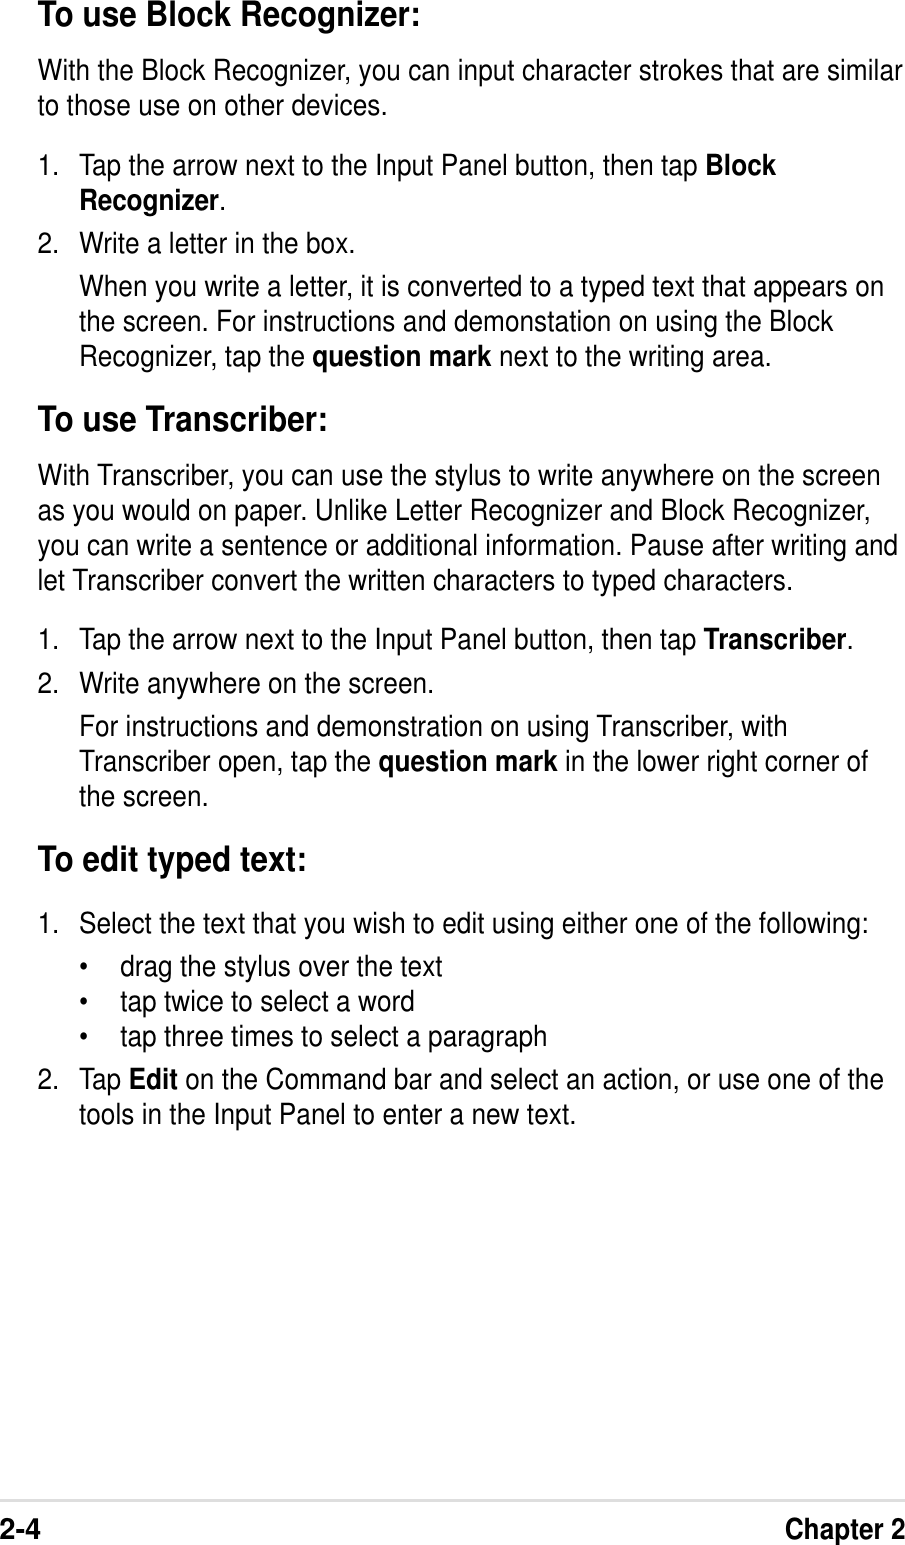 2-4Chapter 2To use Block Recognizer:With the Block Recognizer, you can input character strokes that are similarto those use on other devices.1. Tap the arrow next to the Input Panel button, then tap BlockRecognizer.2. Write a letter in the box.When you write a letter, it is converted to a typed text that appears onthe screen. For instructions and demonstation on using the BlockRecognizer, tap the question mark next to the writing area.To use Transcriber:With Transcriber, you can use the stylus to write anywhere on the screenas you would on paper. Unlike Letter Recognizer and Block Recognizer,you can write a sentence or additional information. Pause after writing andlet Transcriber convert the written characters to typed characters.1. Tap the arrow next to the Input Panel button, then tap Transcriber.2. Write anywhere on the screen.For instructions and demonstration on using Transcriber, withTranscriber open, tap the question mark in the lower right corner ofthe screen.To edit typed text:1. Select the text that you wish to edit using either one of the following:•drag the stylus over the text•tap twice to select a word•tap three times to select a paragraph2. Tap Edit on the Command bar and select an action, or use one of thetools in the Input Panel to enter a new text.